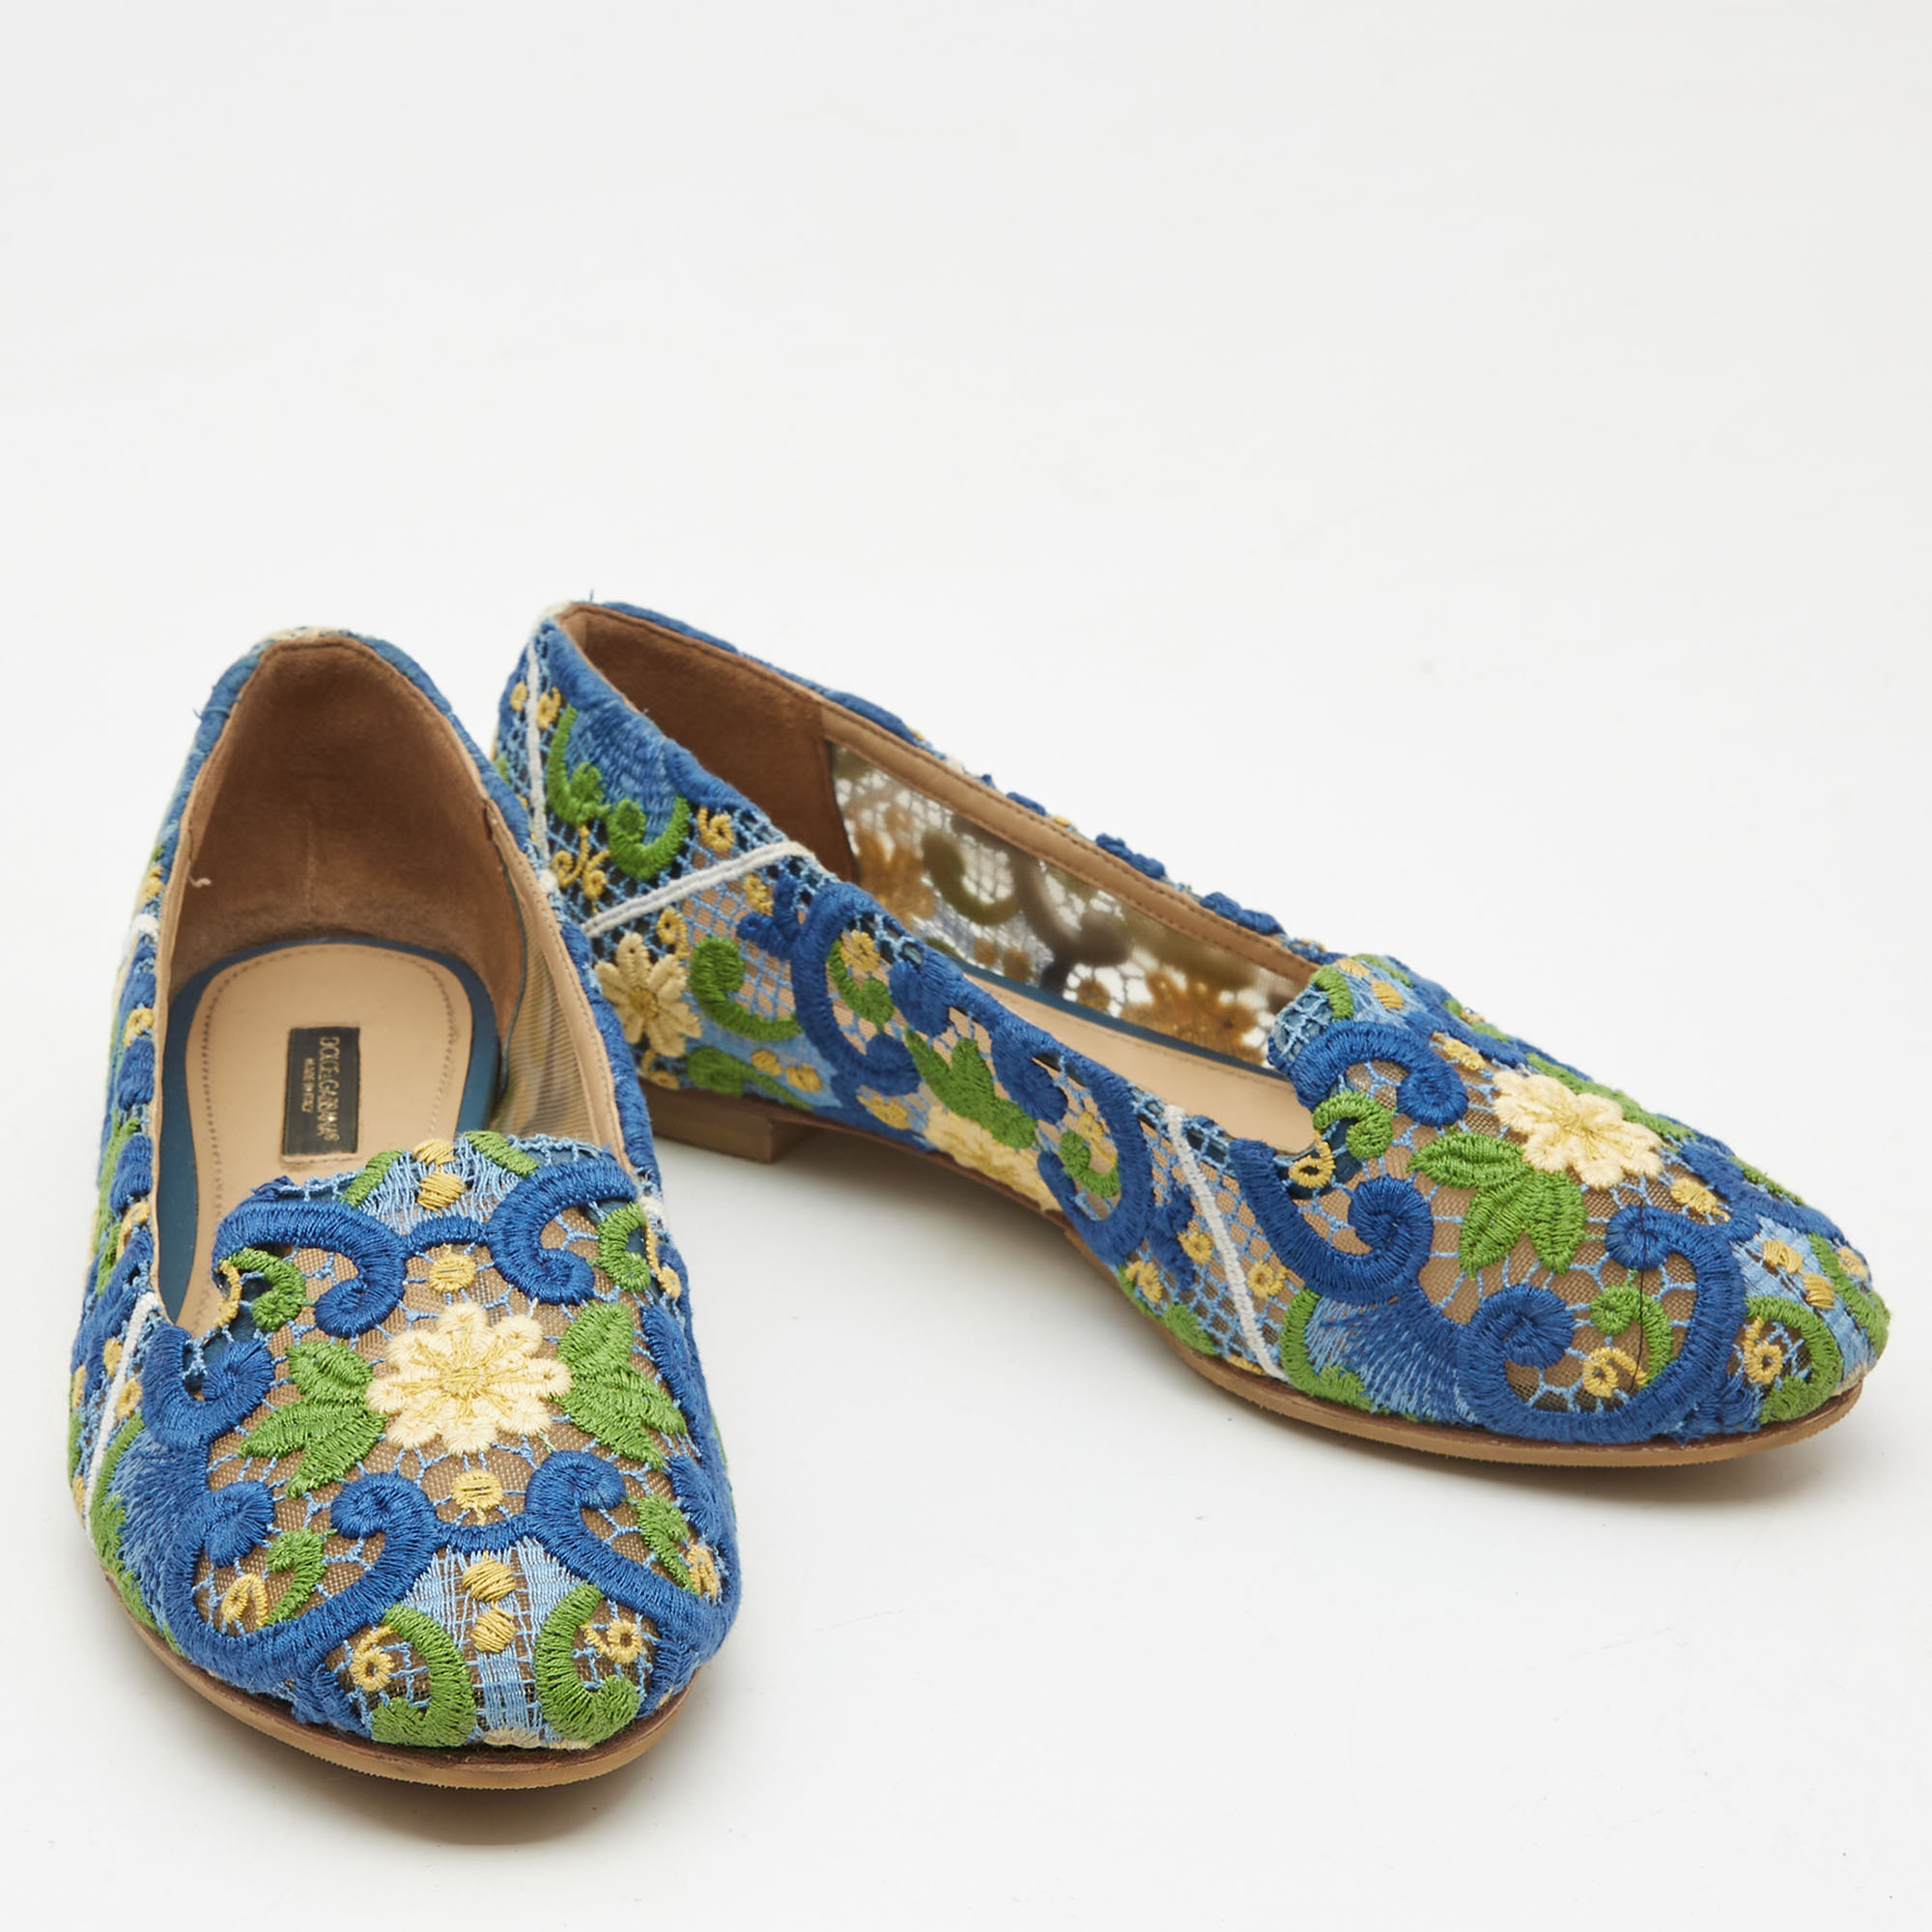 Dolce & Gabbana Tricolor Floral Lace Smoking Slippers Size 37